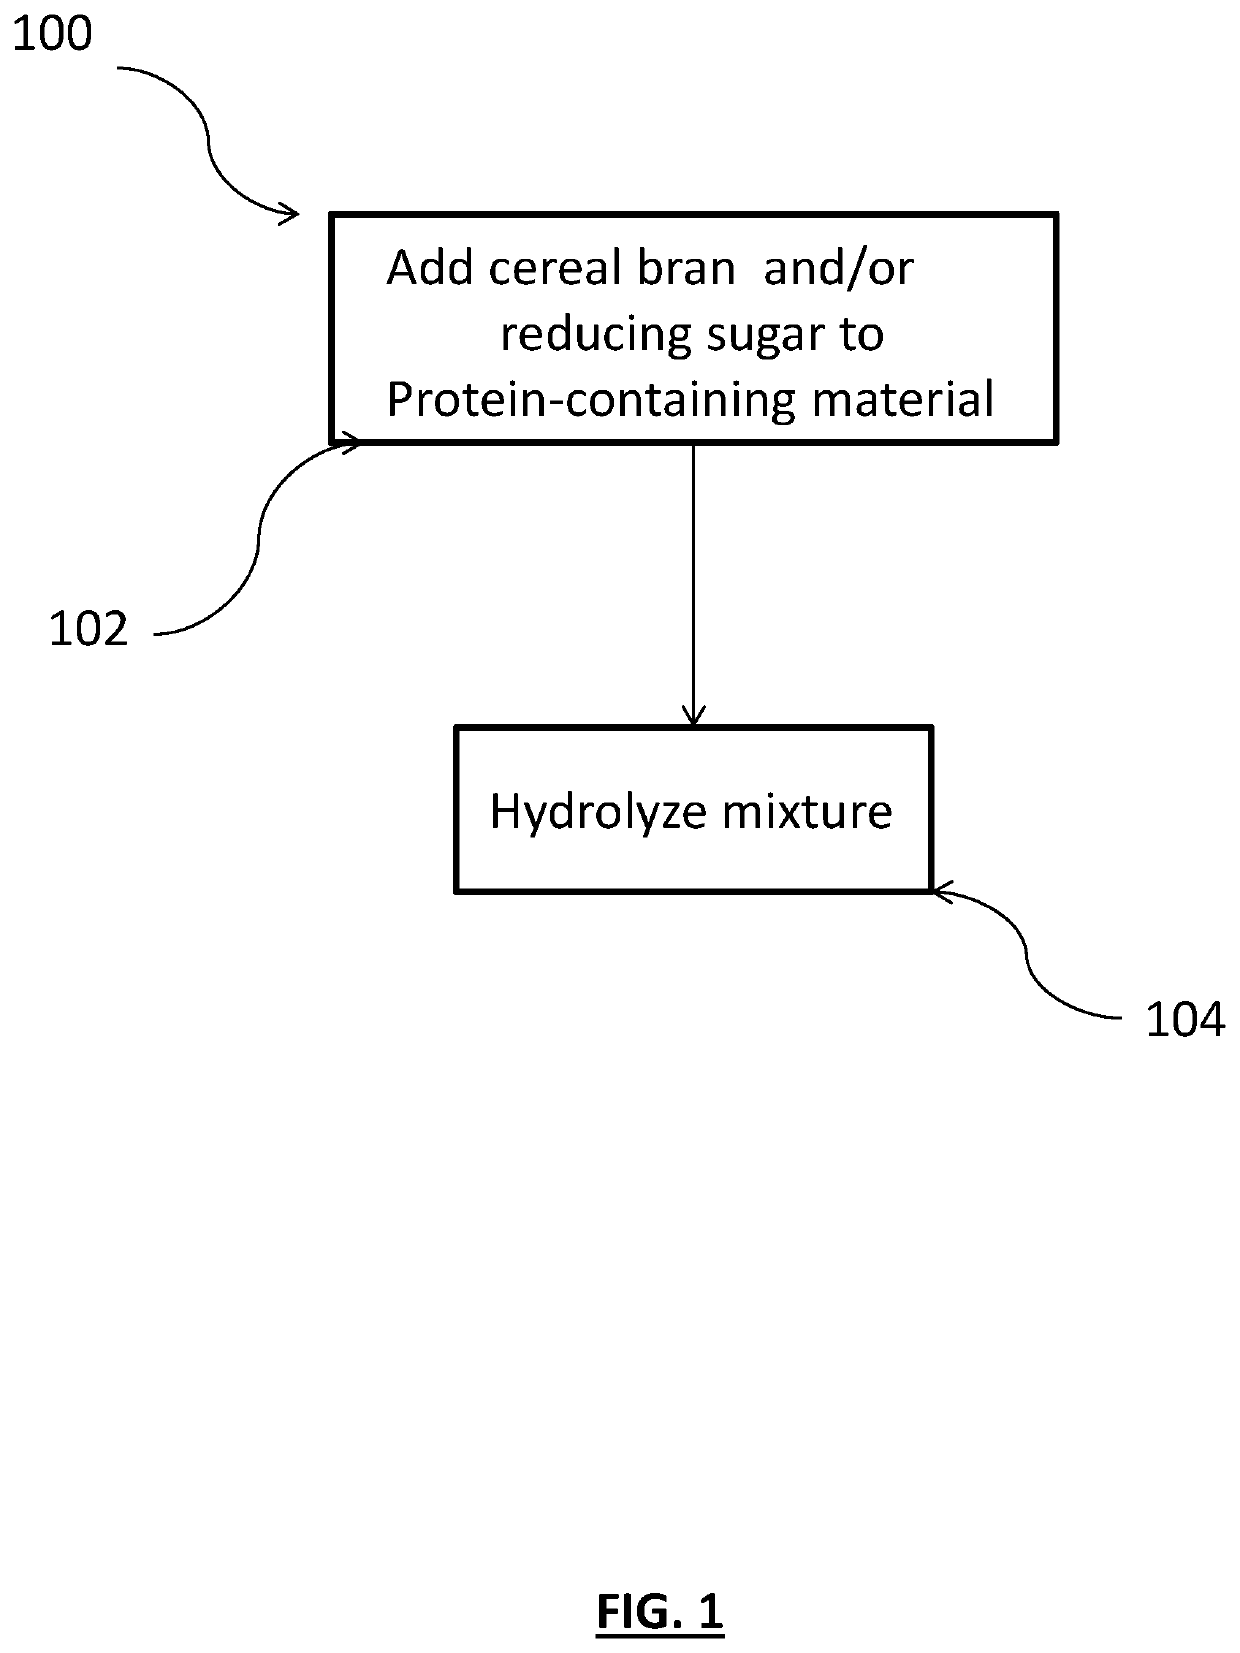 Methods for producing feather-based food products